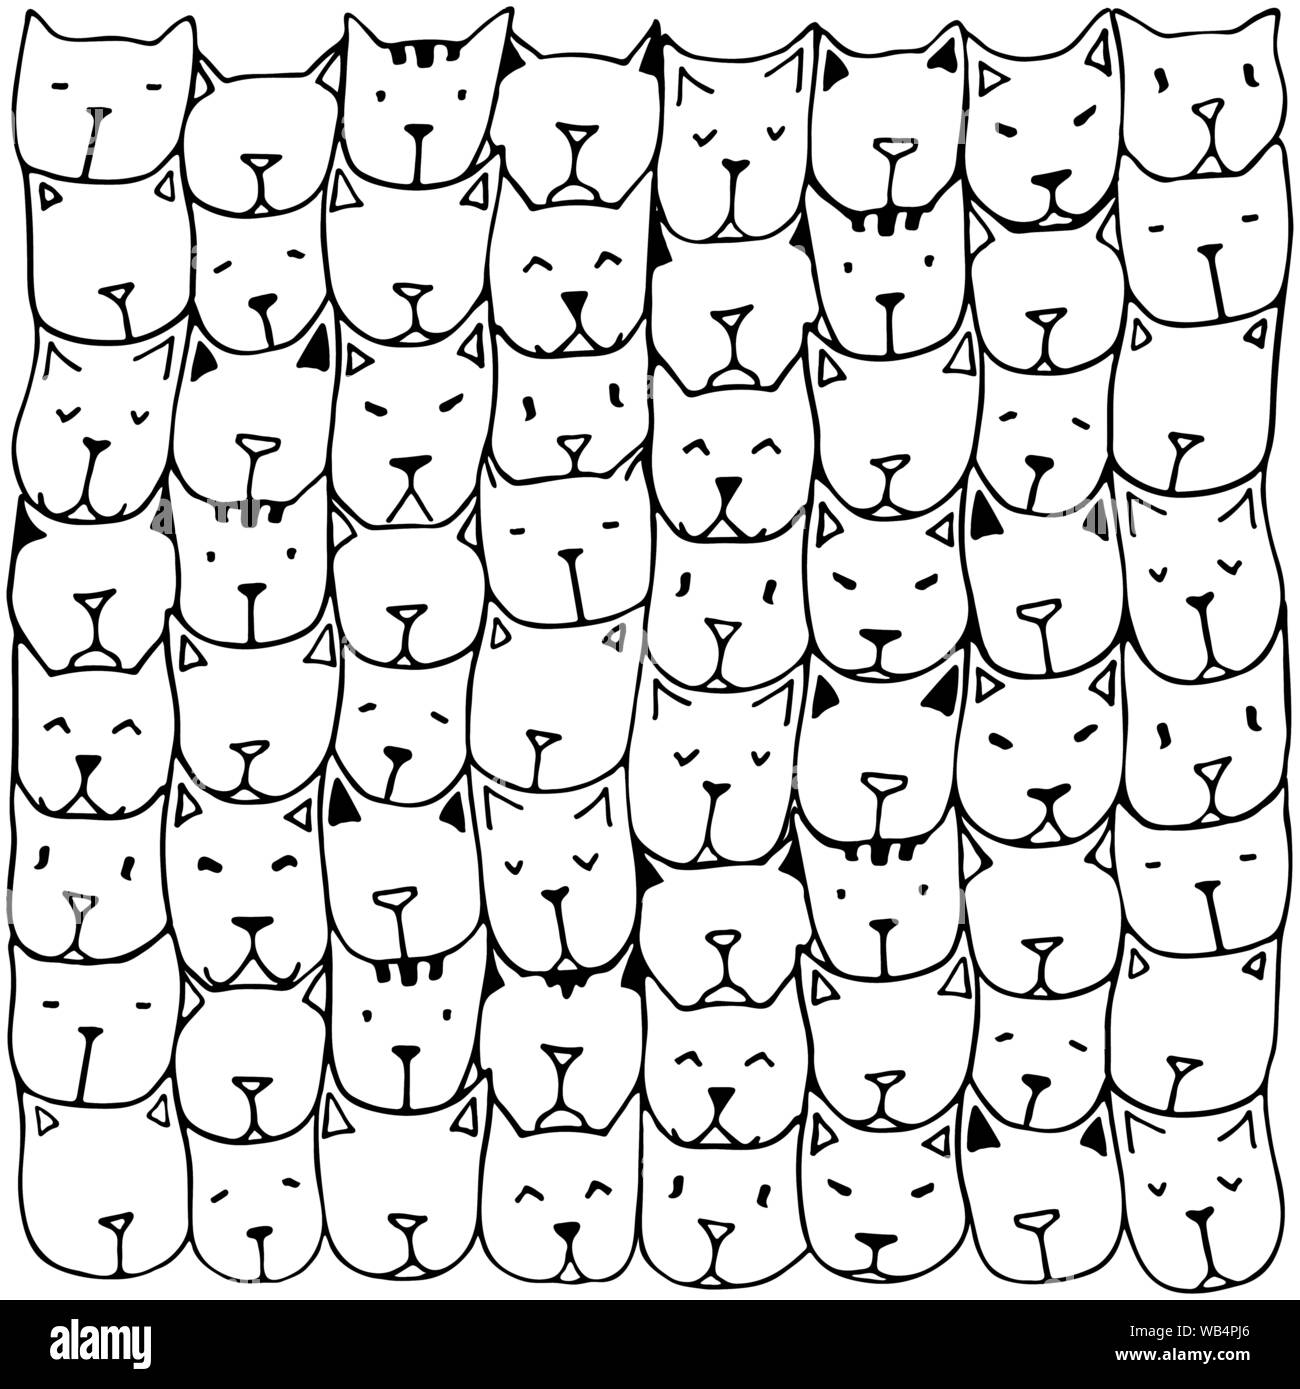 Seamles pattern with cute hand drawn doodle cats. Vintage vector illustration. Background with cat faces. Adult coloring pages. Coloring book. Stock Vector